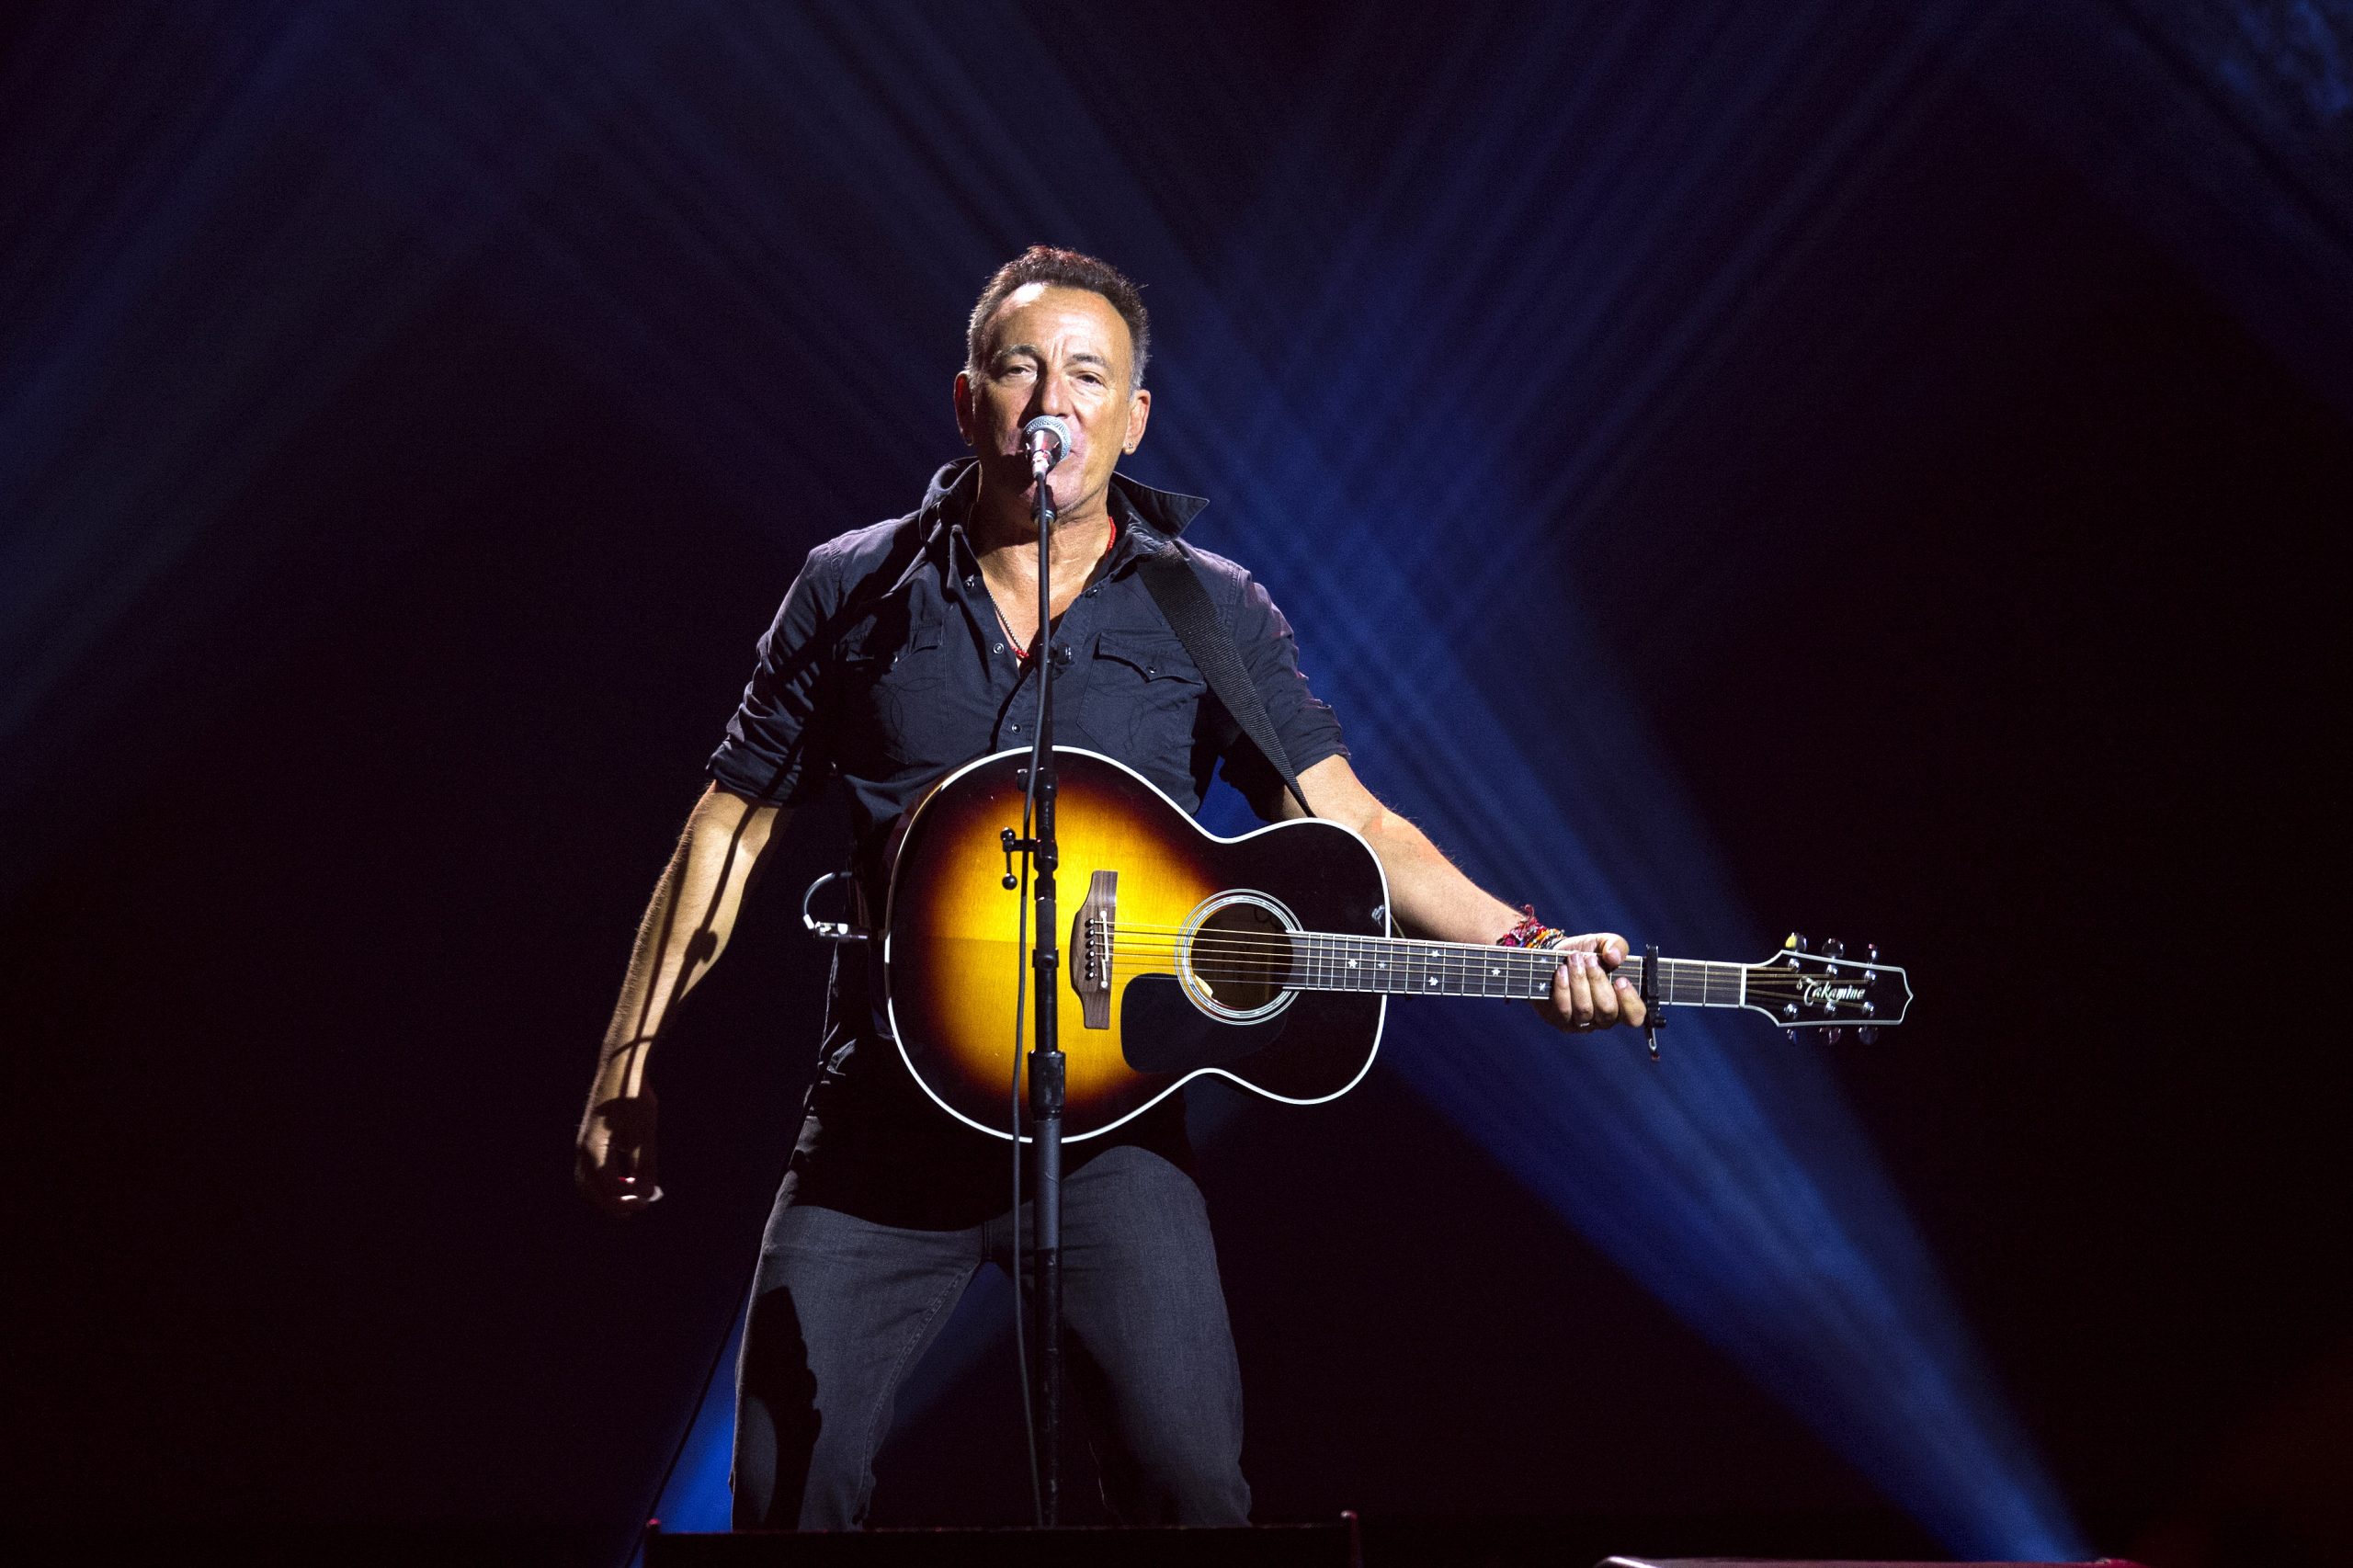 Review – Western Stars, Bruce Springsteen